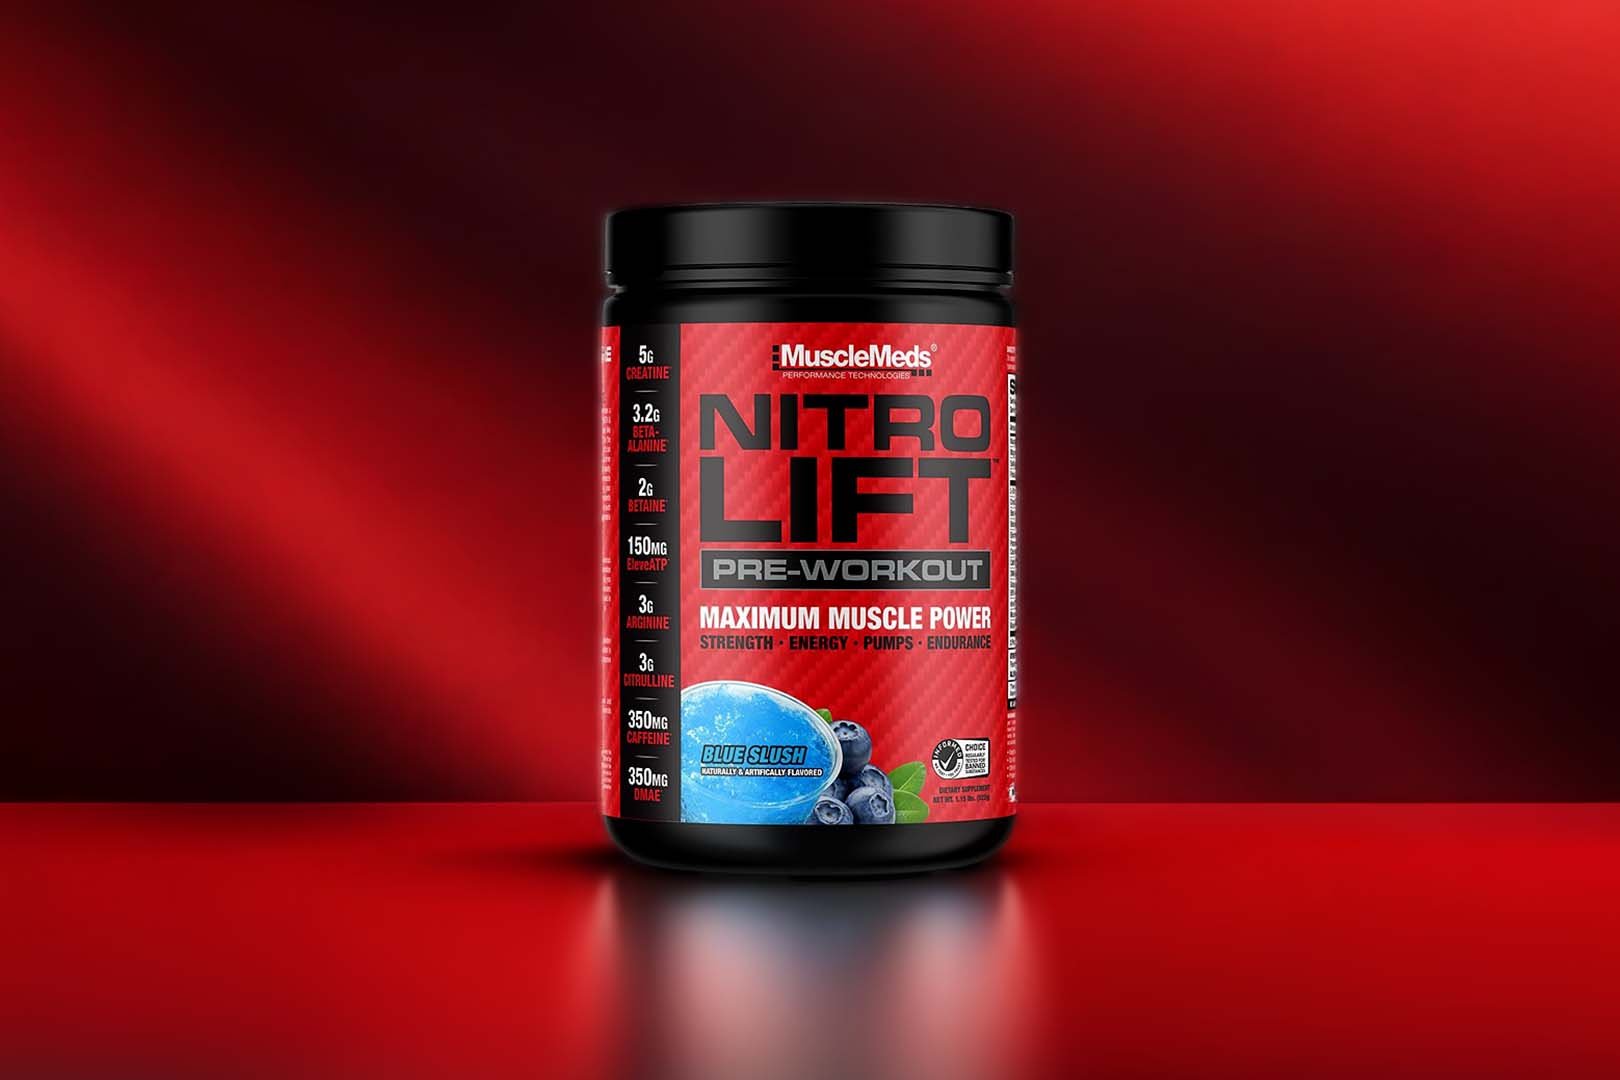 MuscleMeds returns to the pre-workout category with a great value competitor